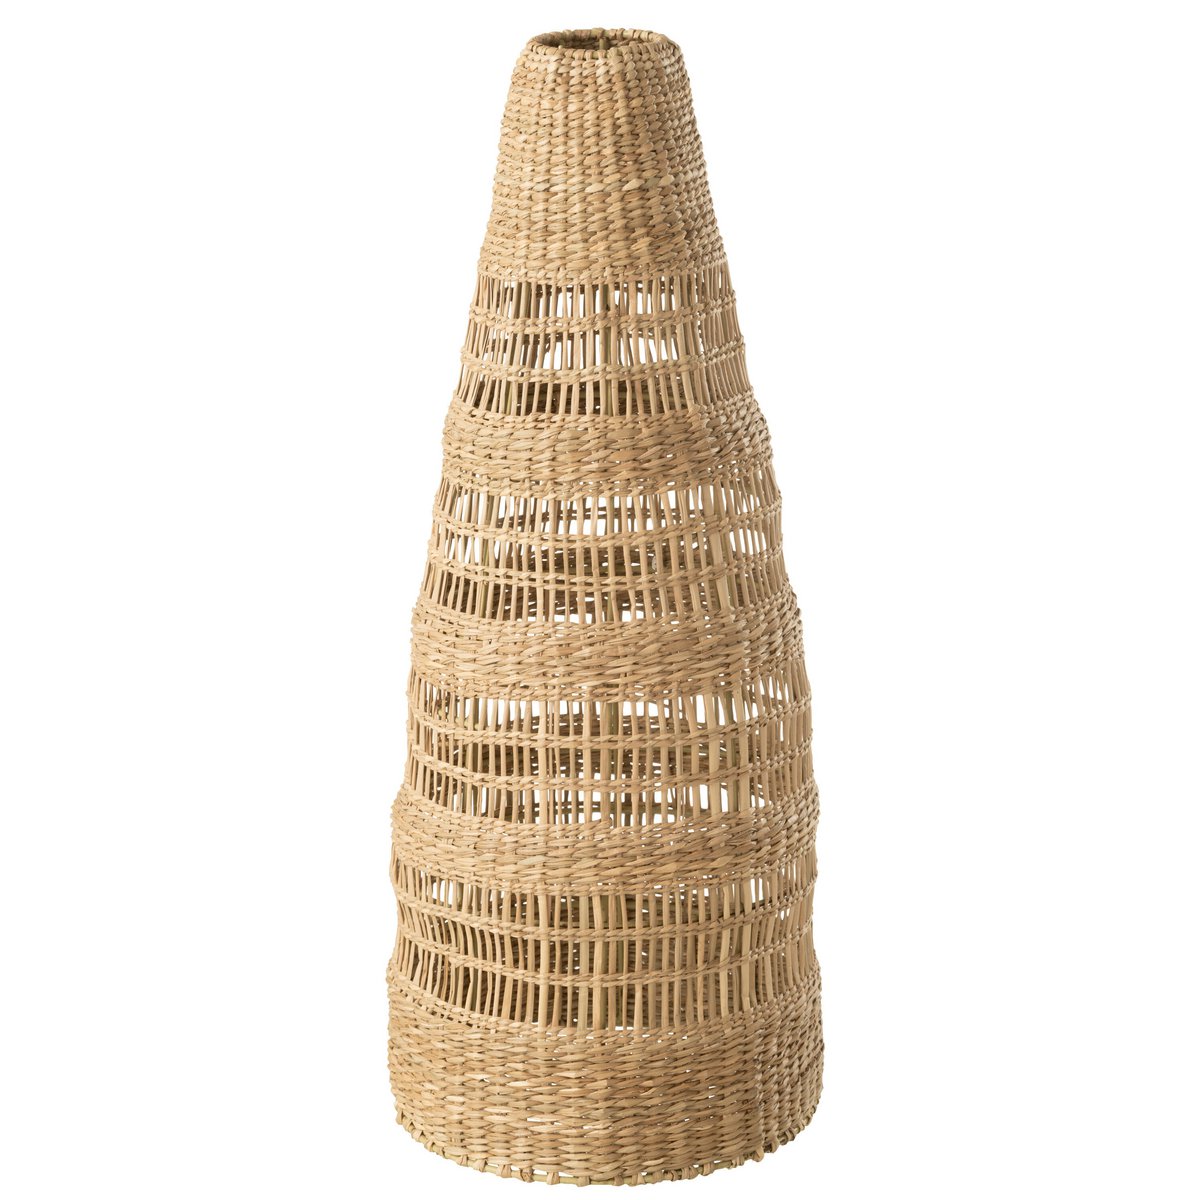 Lampshade made of seagrass - bottle-shaped, narrow - natural